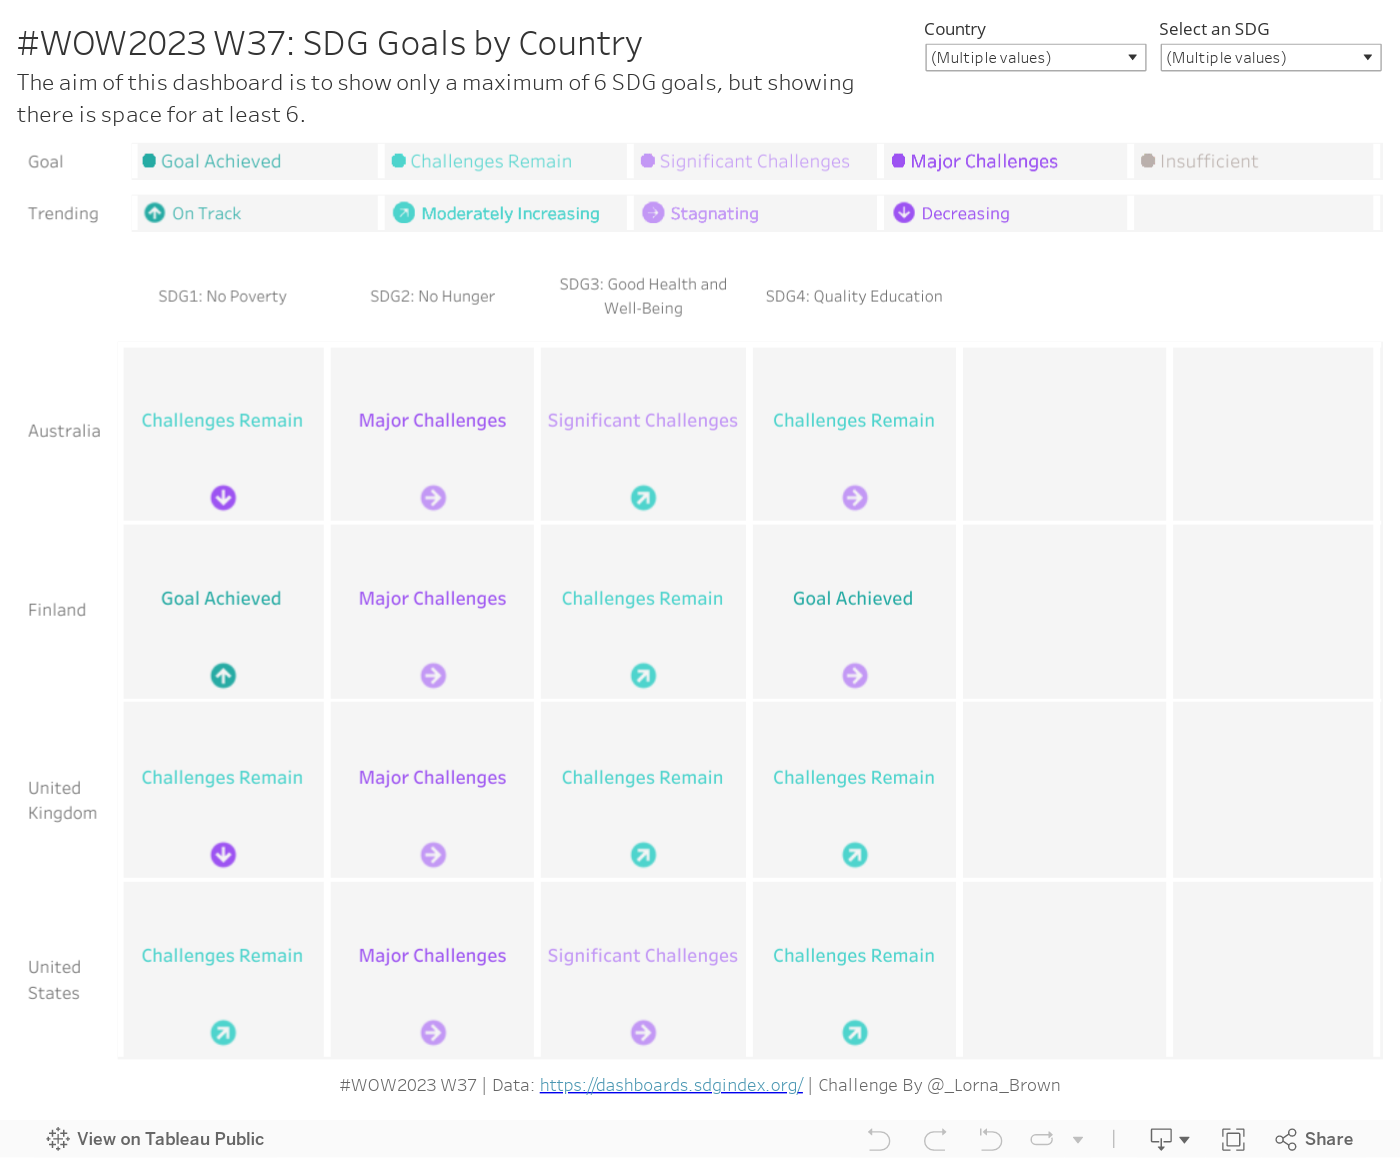 #WOW2023 W37: SDG Goals by CountryThe aim of this dashboard is to show only a maximum of 6 SDG goals, but showing there is space for at least 6. 